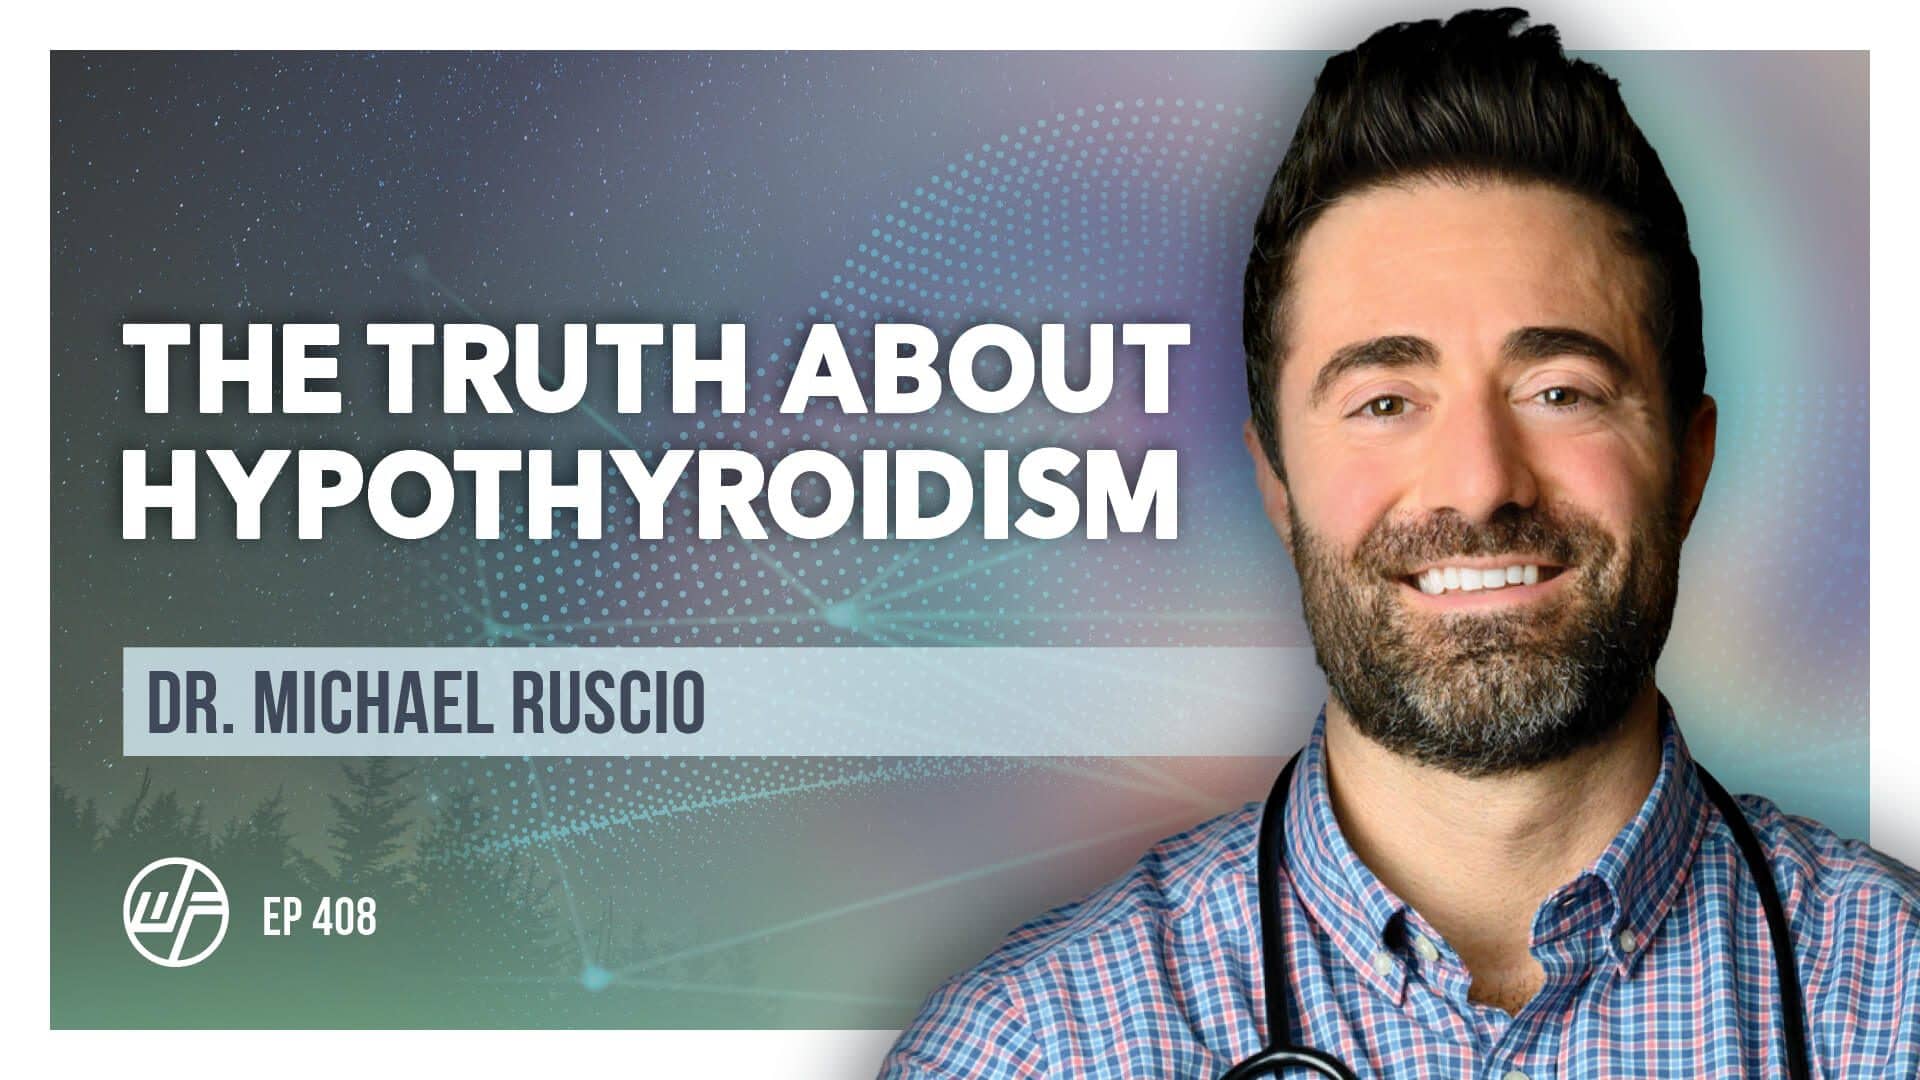 Dr Michael Ruscio Hypothyroidism Thyroid Symptoms And The Truth About Hypothyroid Wellness 